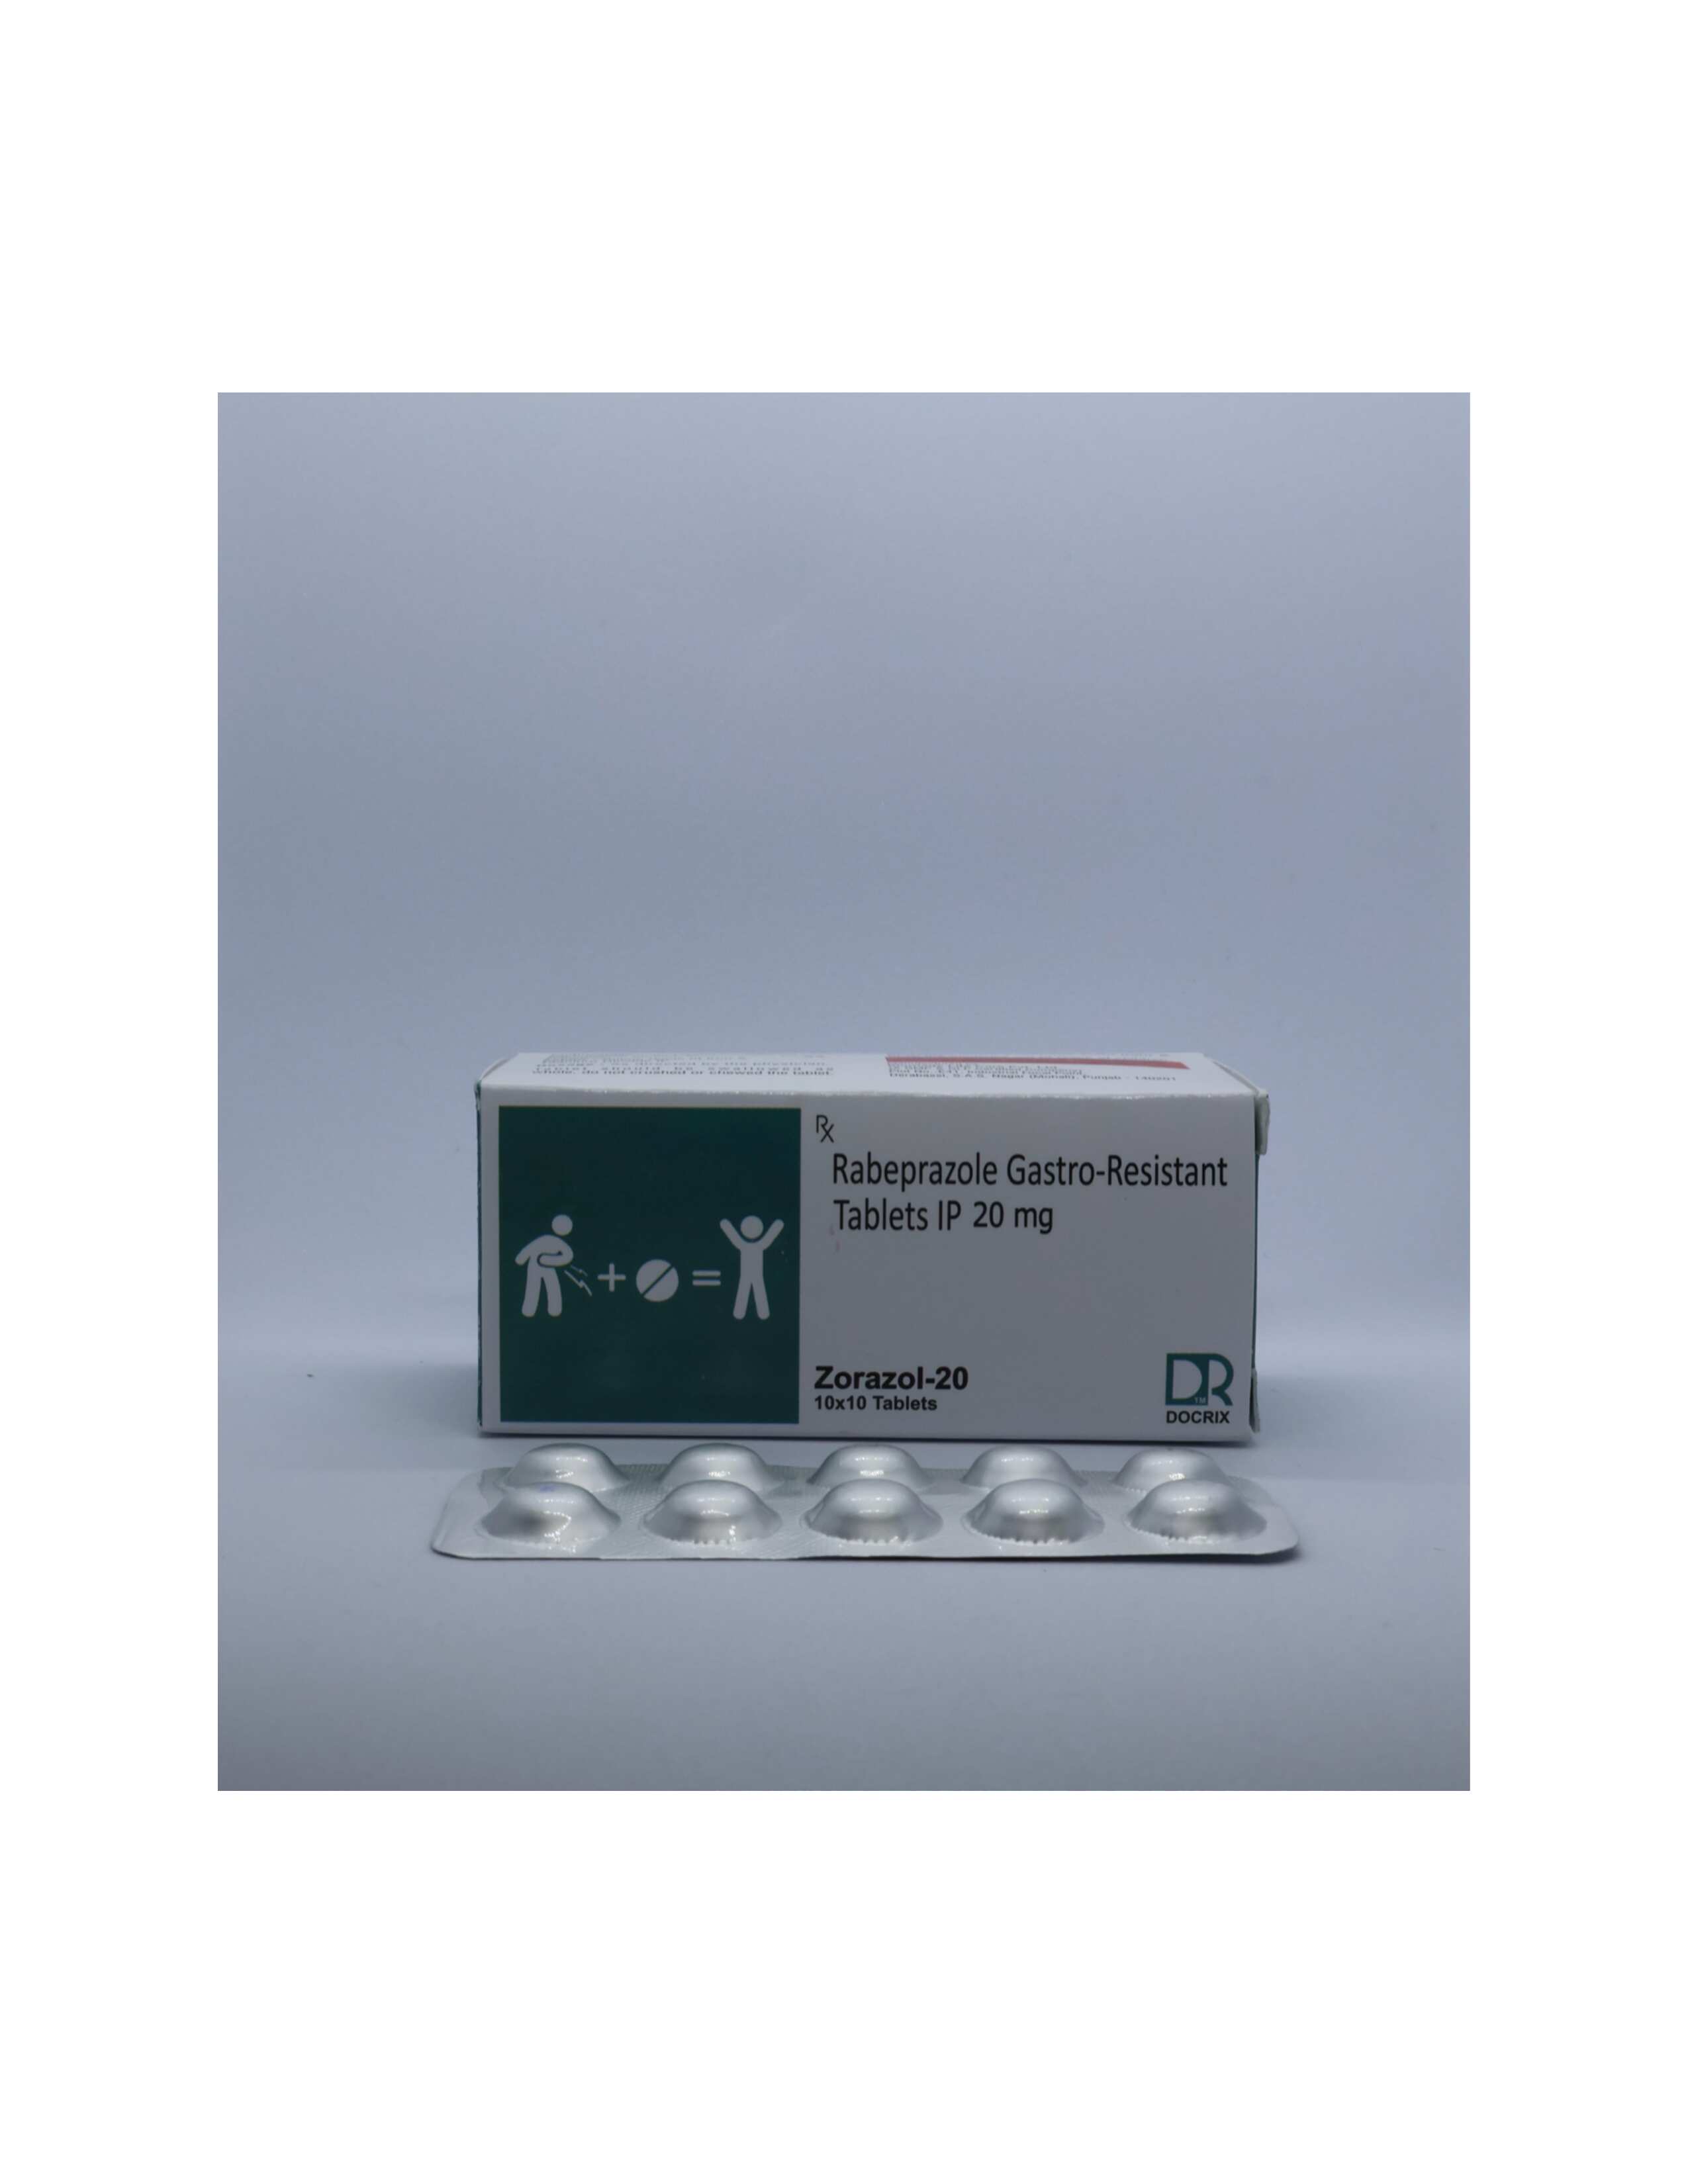 Product Name: Zorazol 20, Compositions of Zorazol 20 are Rabeprazole Gastro-Resistant Tablets IP 20 mg - Docrix Healthcare